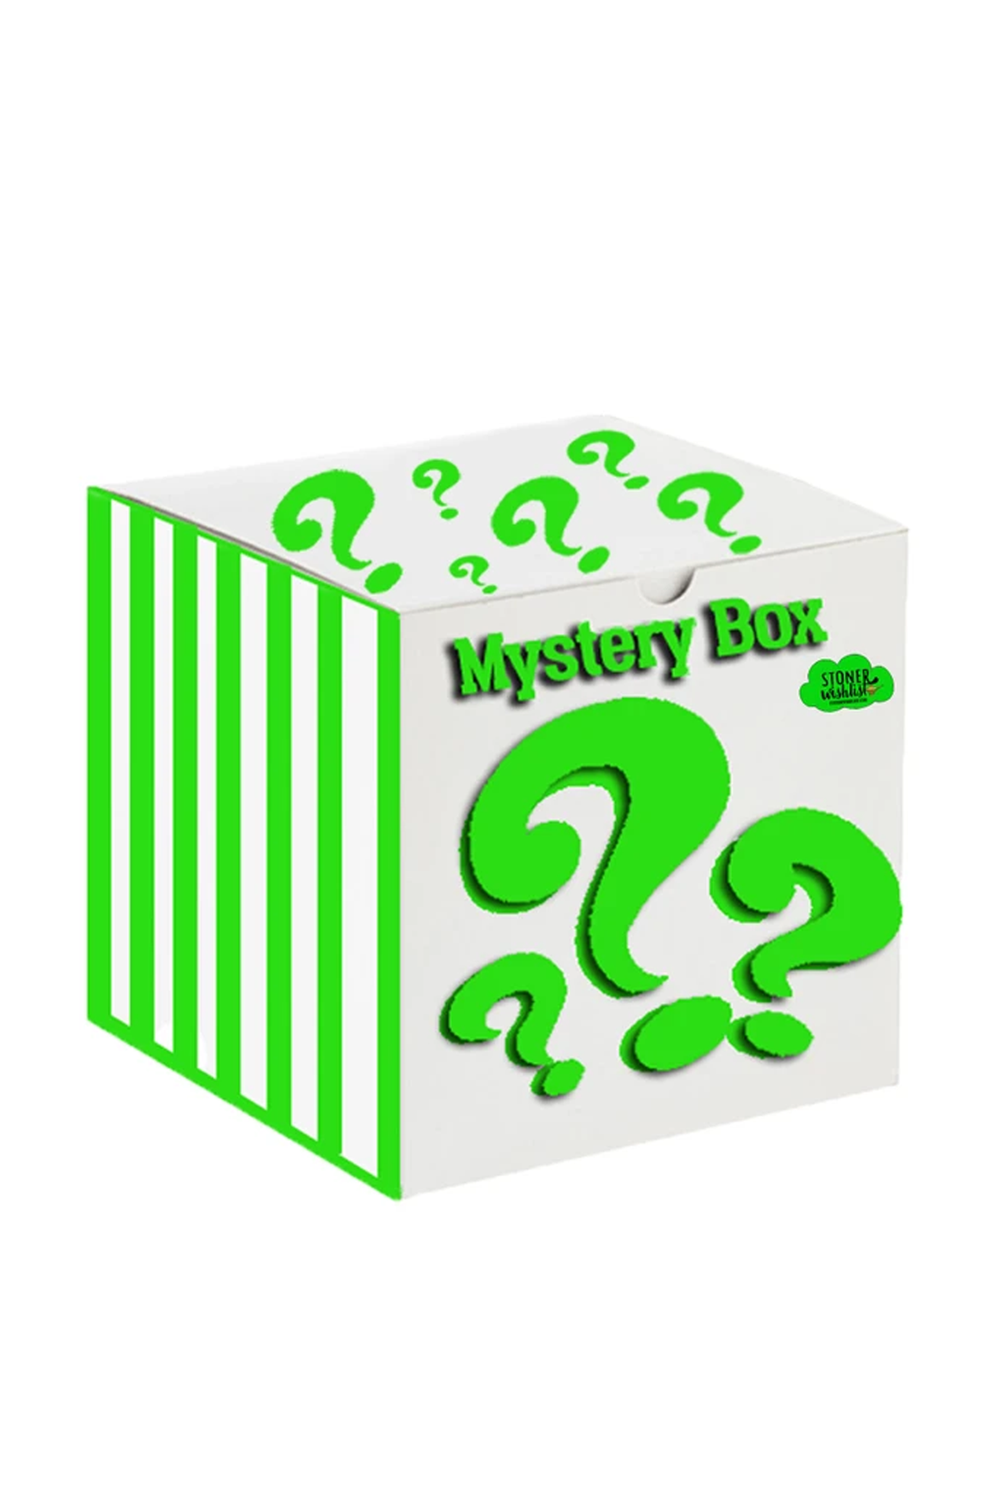 Mystery Box - The SWL Store 